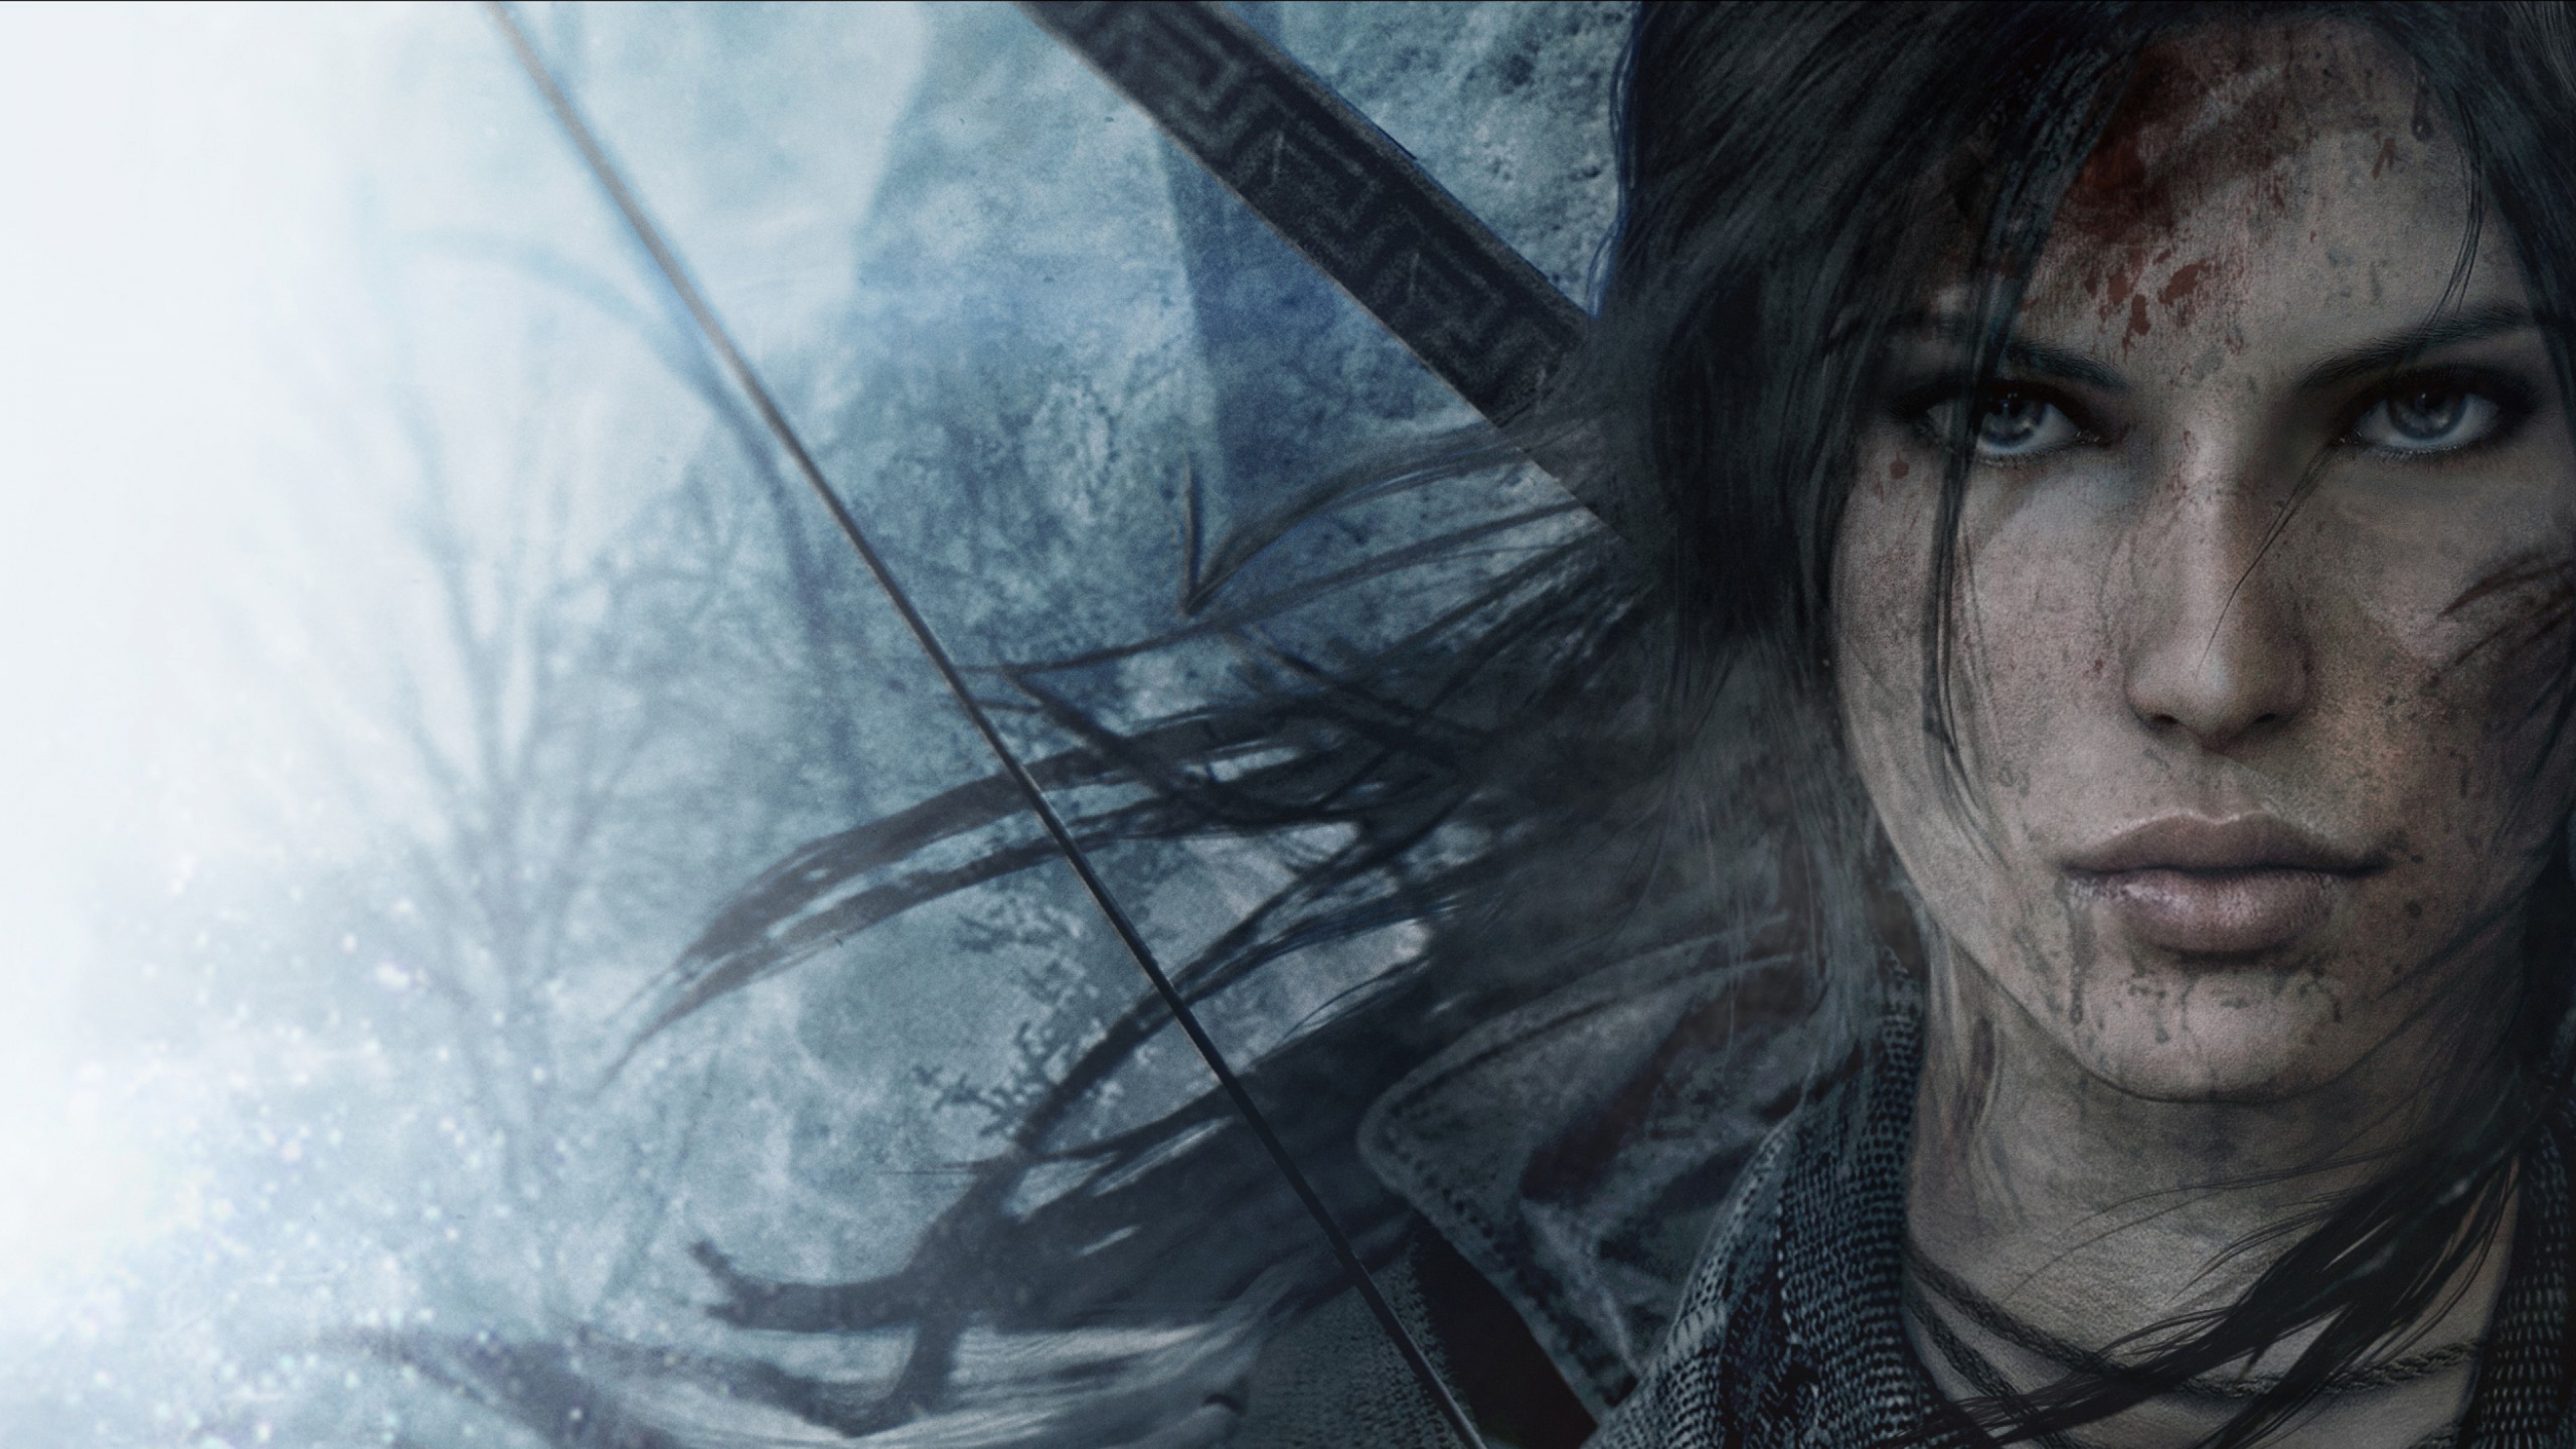  croft Rise of the tomb raider Face Wallpaper Background 4K Ultra HD 3840x2160